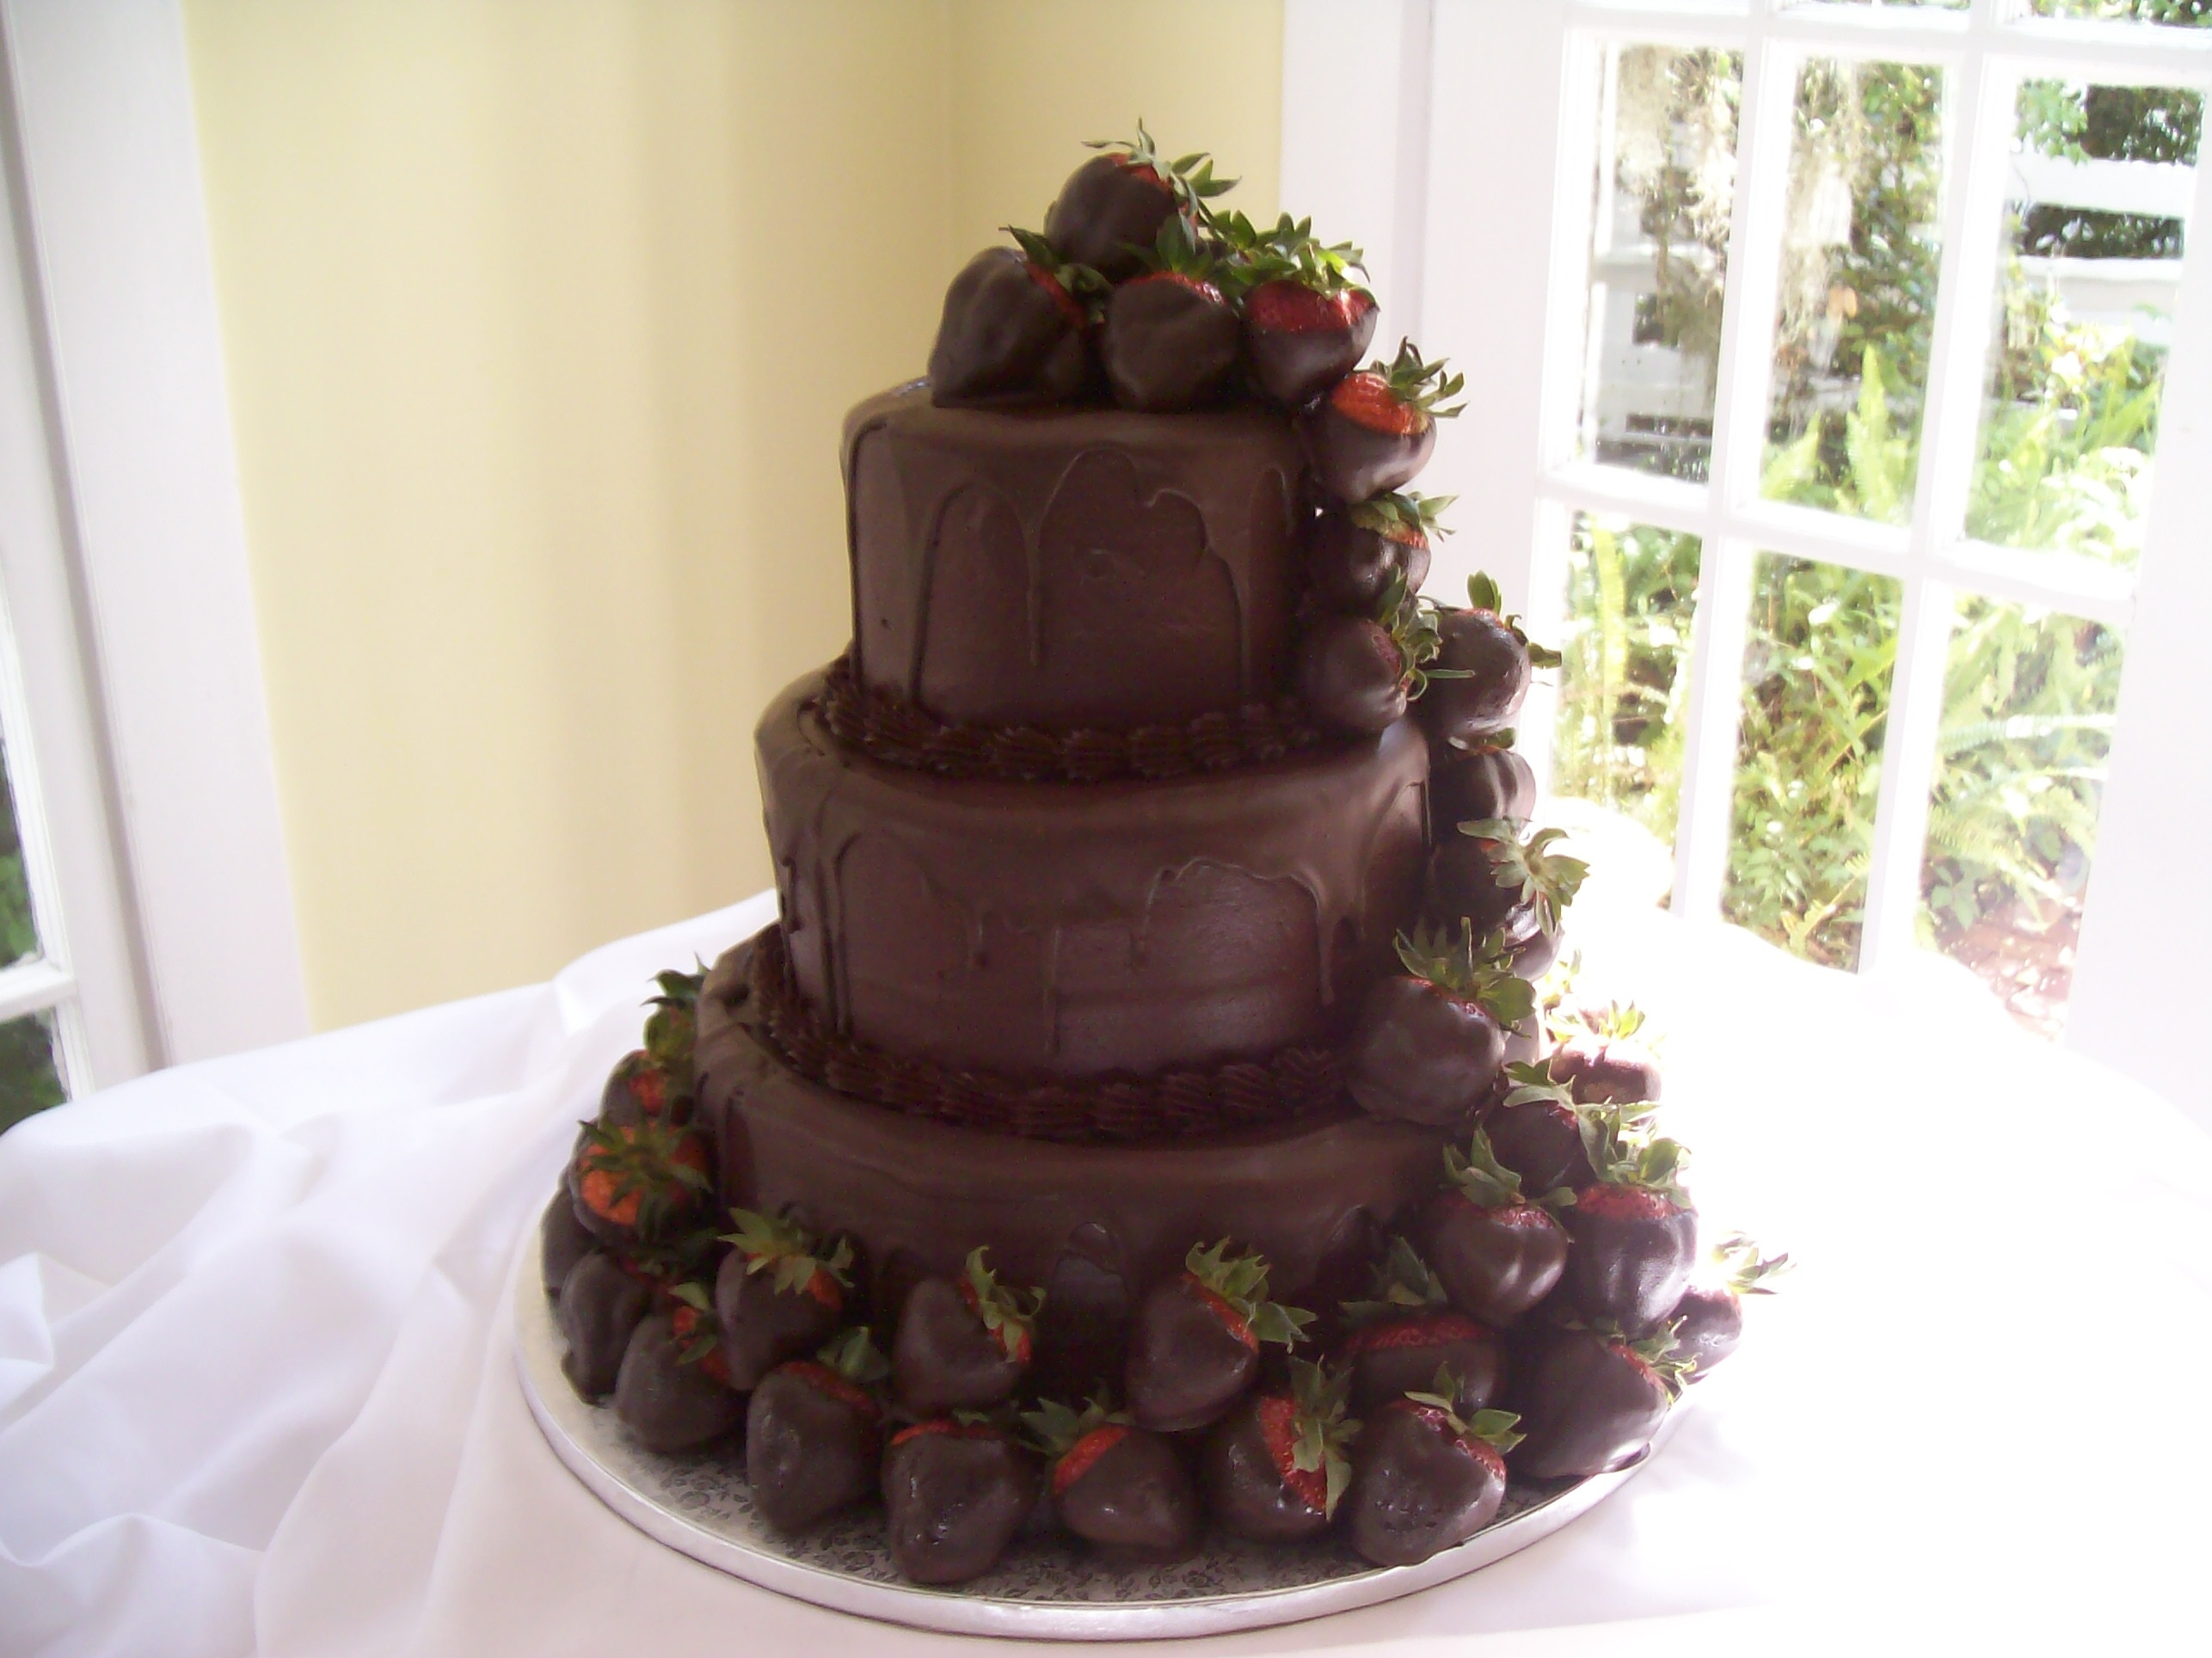 Wedding Cakes At Publix
 10 tips on how to choose your Publix wedding cakes idea